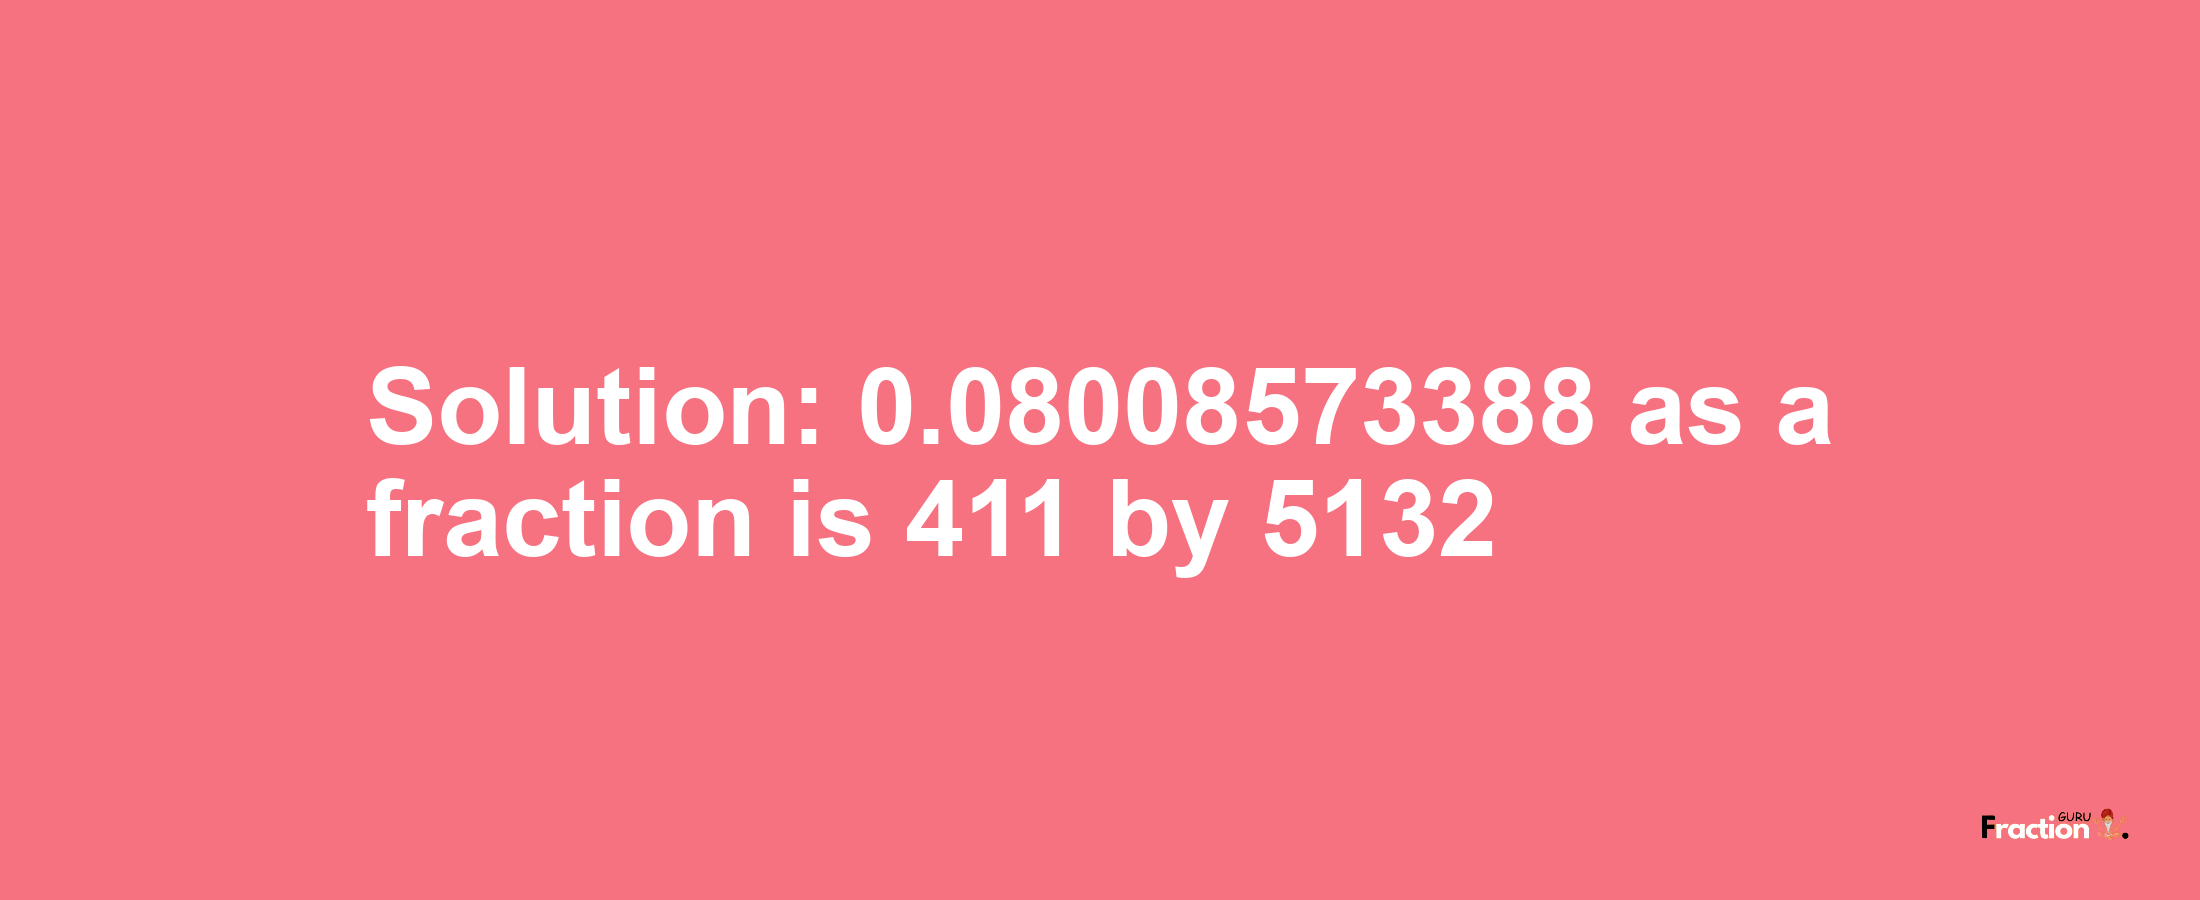 Solution:0.08008573388 as a fraction is 411/5132